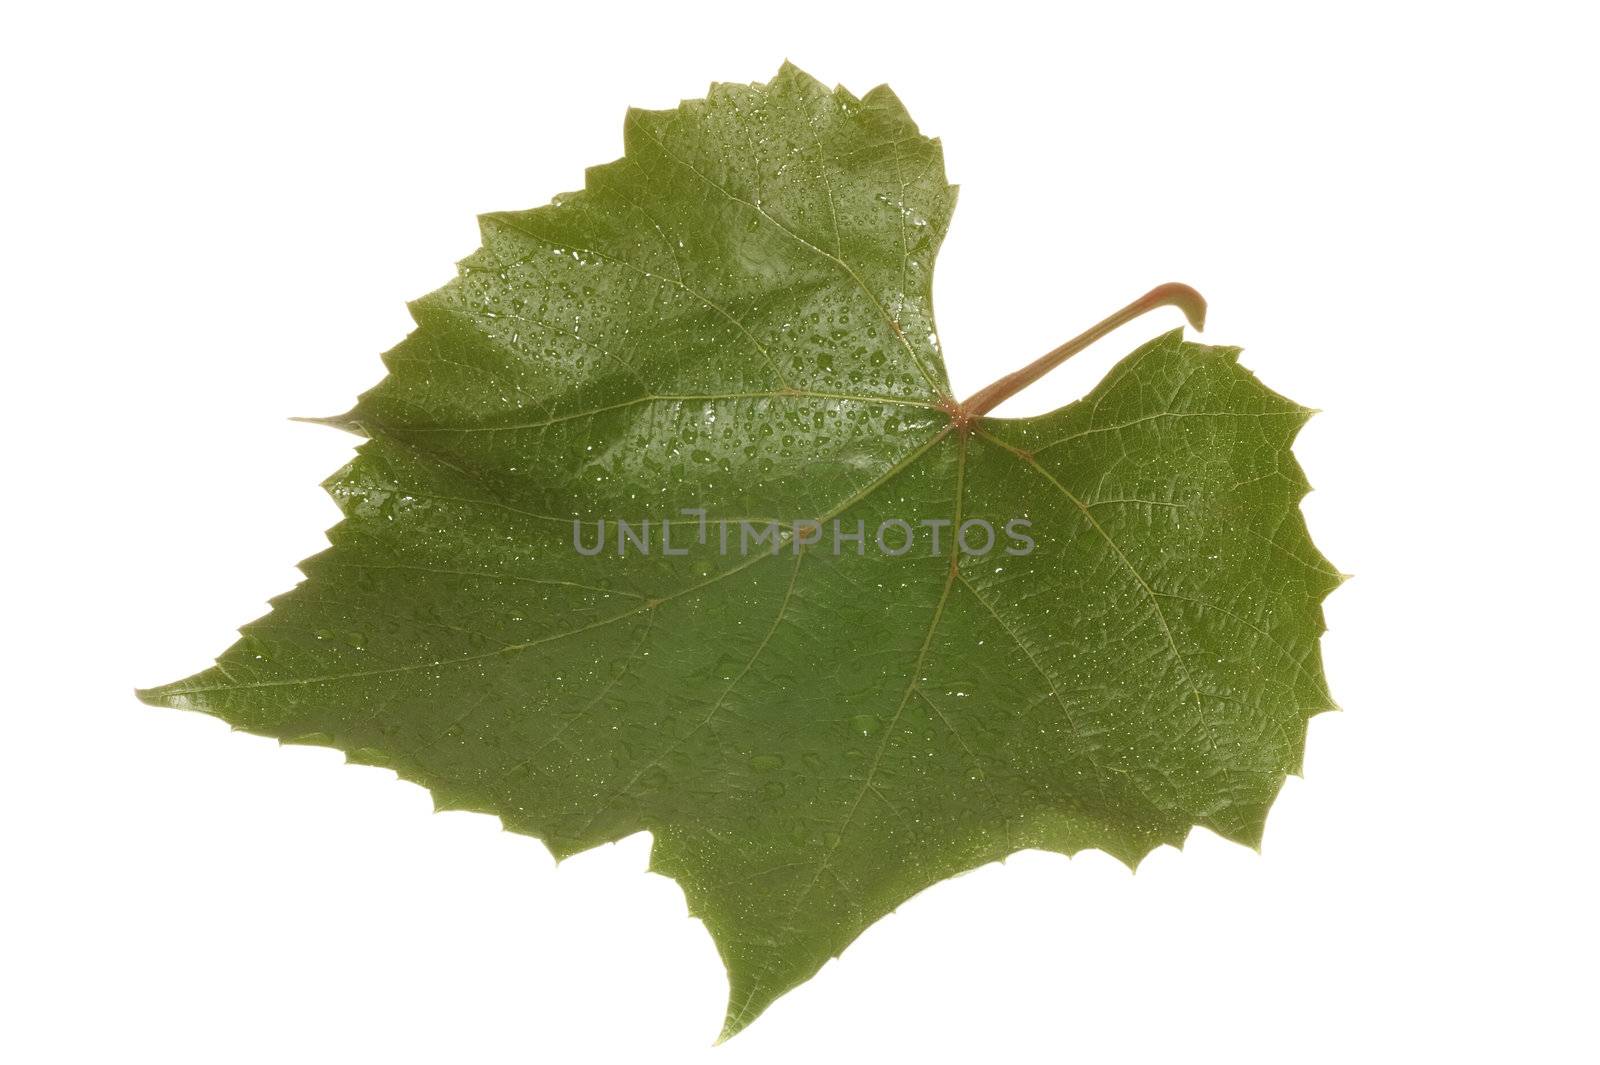 Leaf of grape  on white background close-up